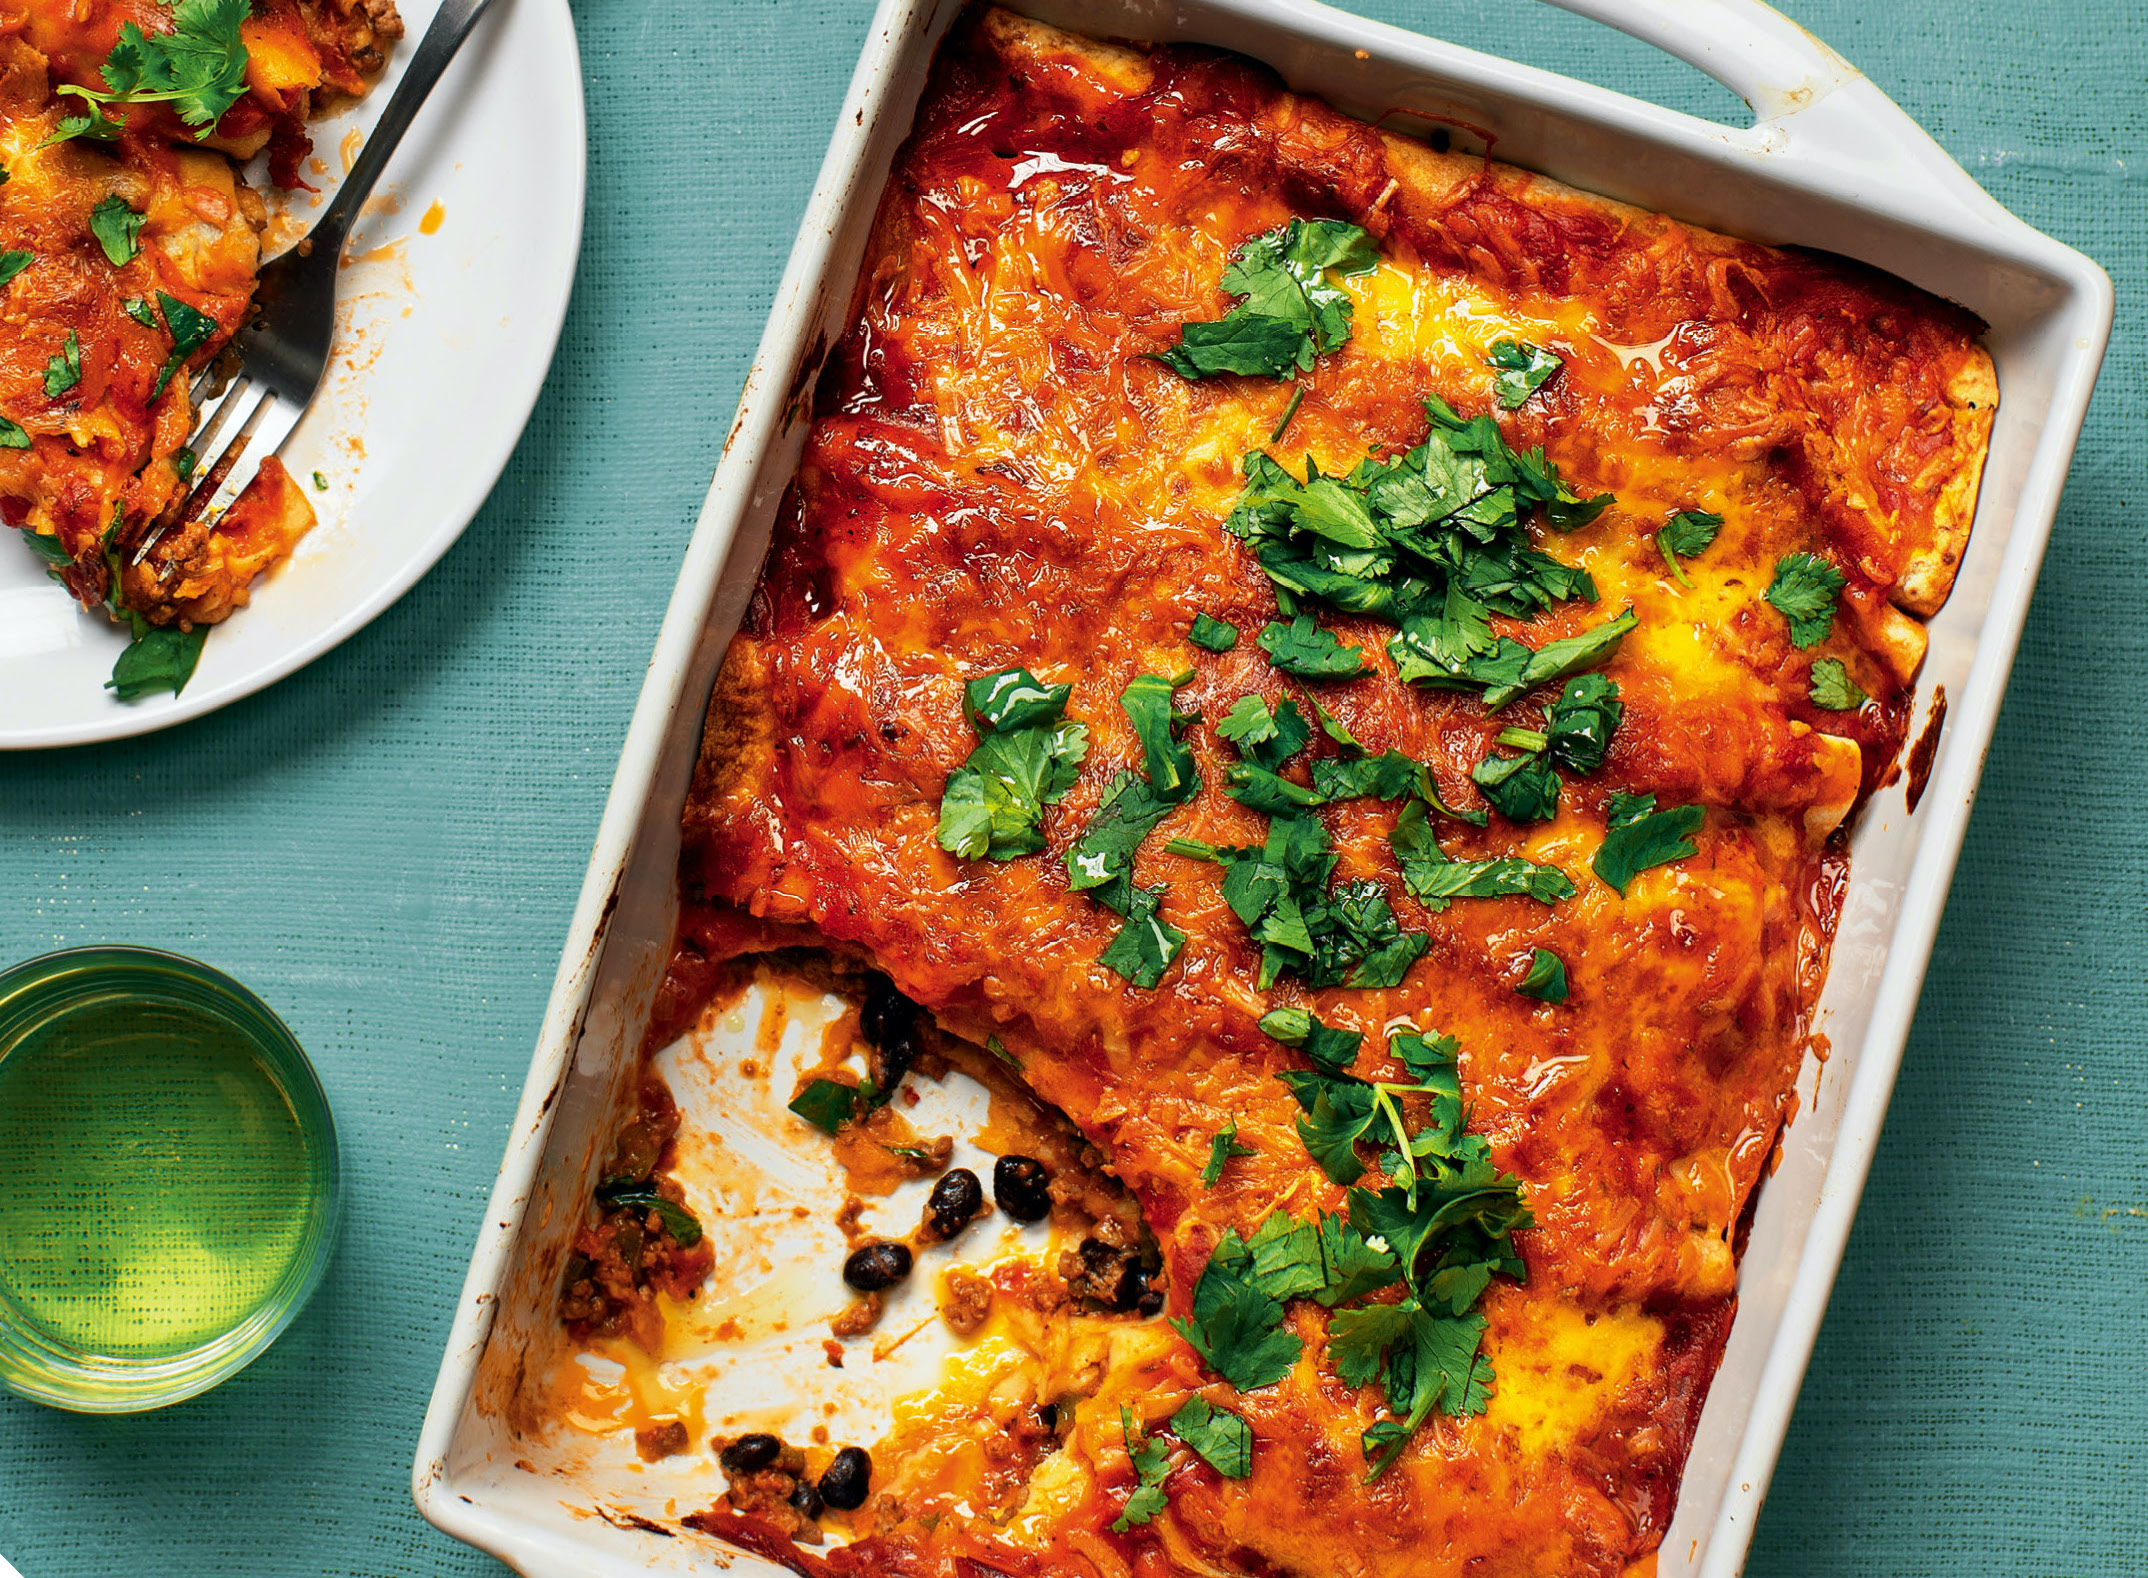 You are currently viewing Dig into our delicious Mexican enchilada bake